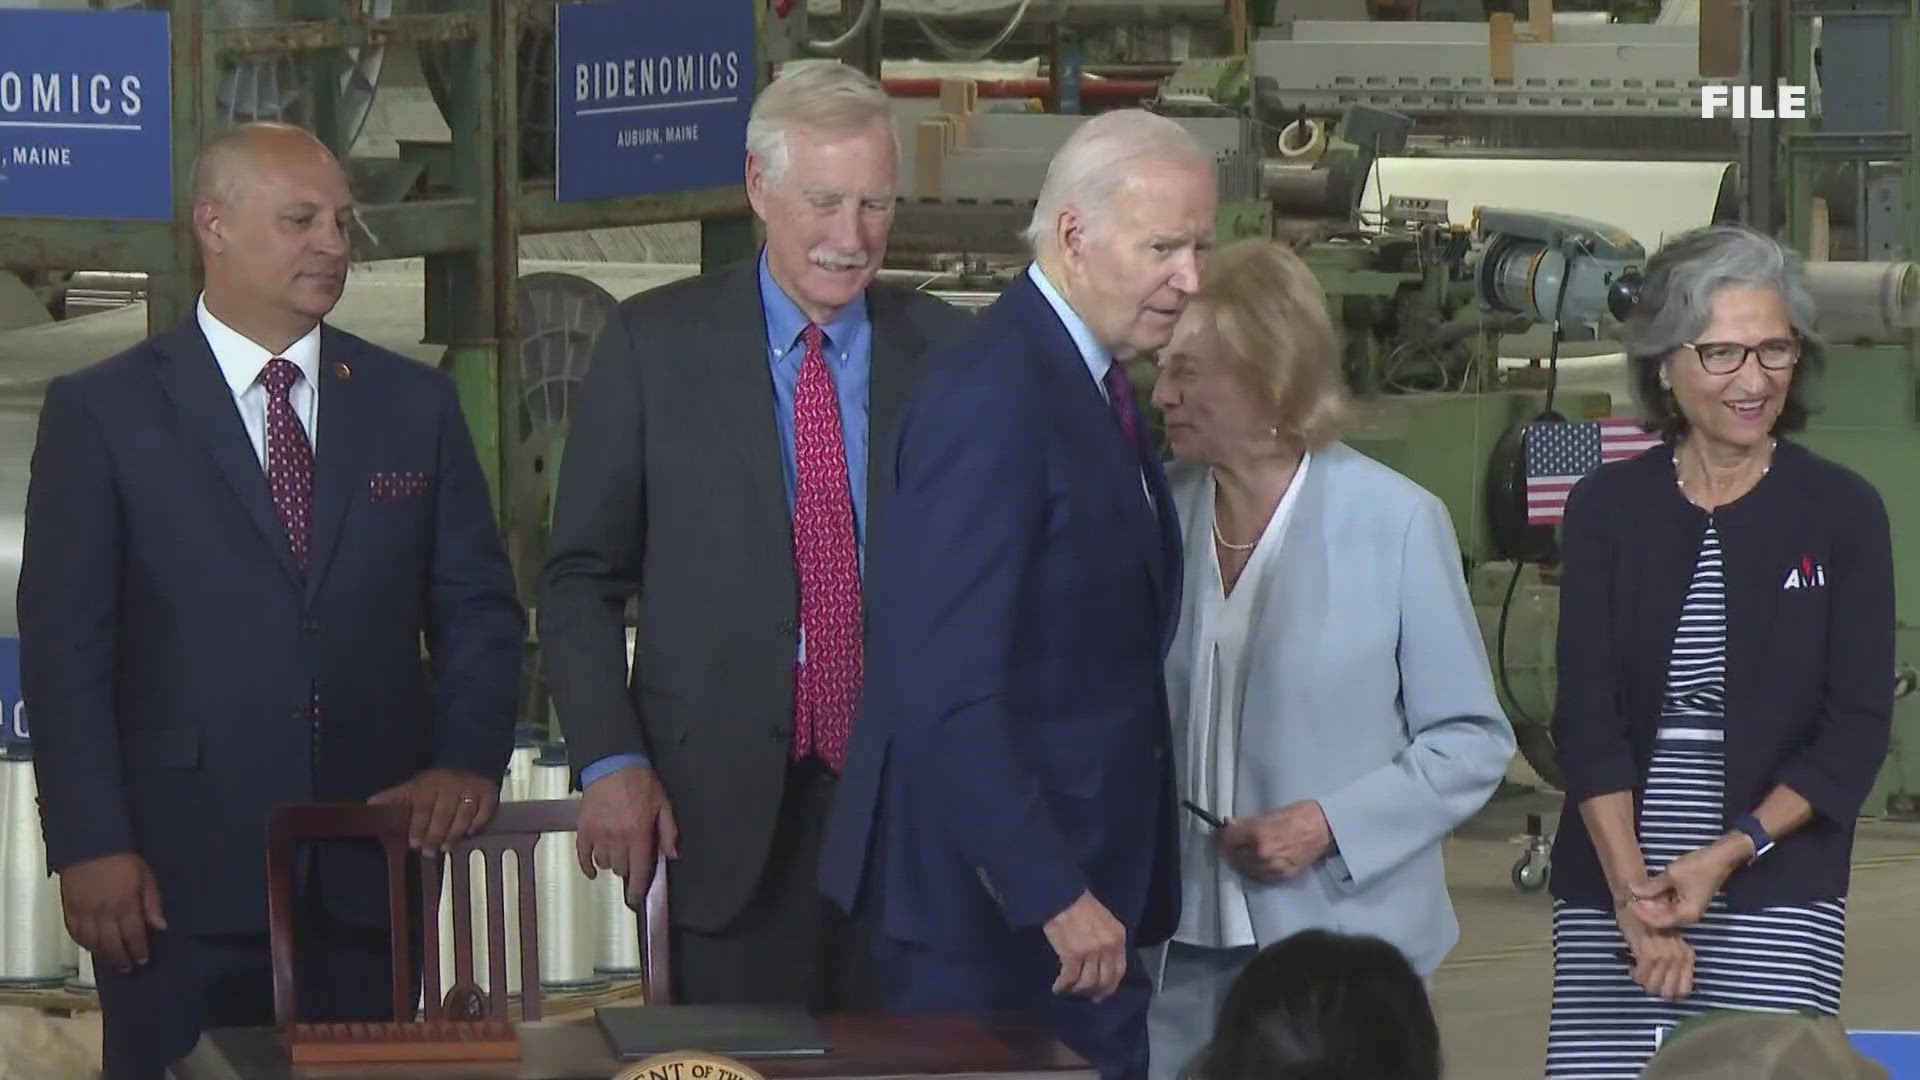 The meeting with Mills and other Democratic governors across the country comes amid calls for Biden to step aside in the presidential race after last week's debate.